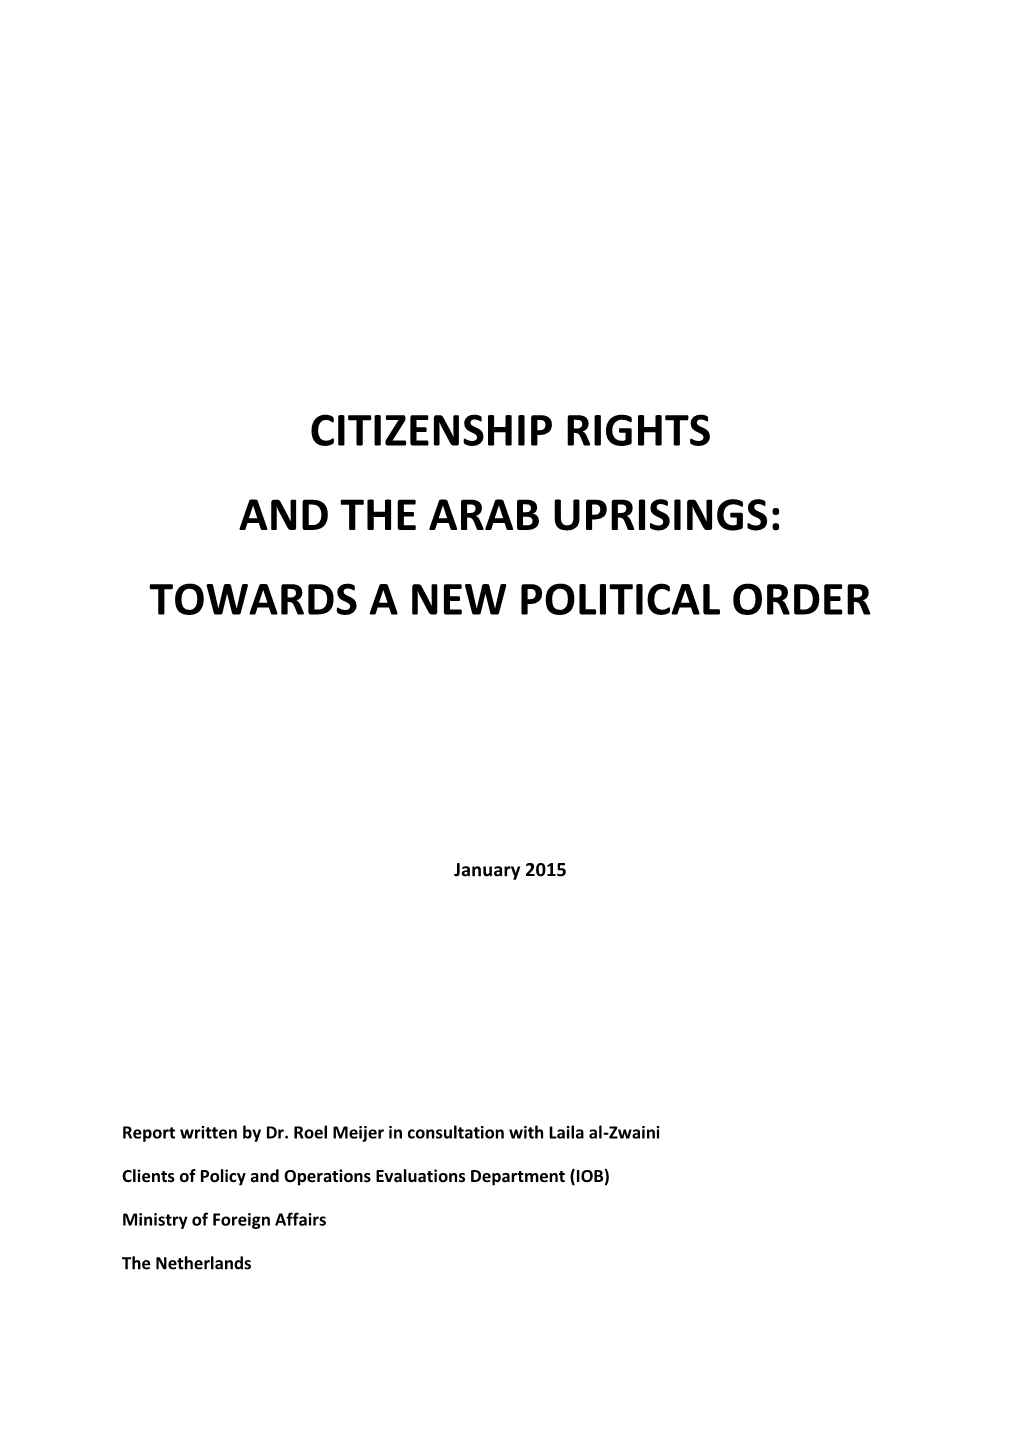 Citizenship Rights and the Arab Uprisings: Towards a New Political Order